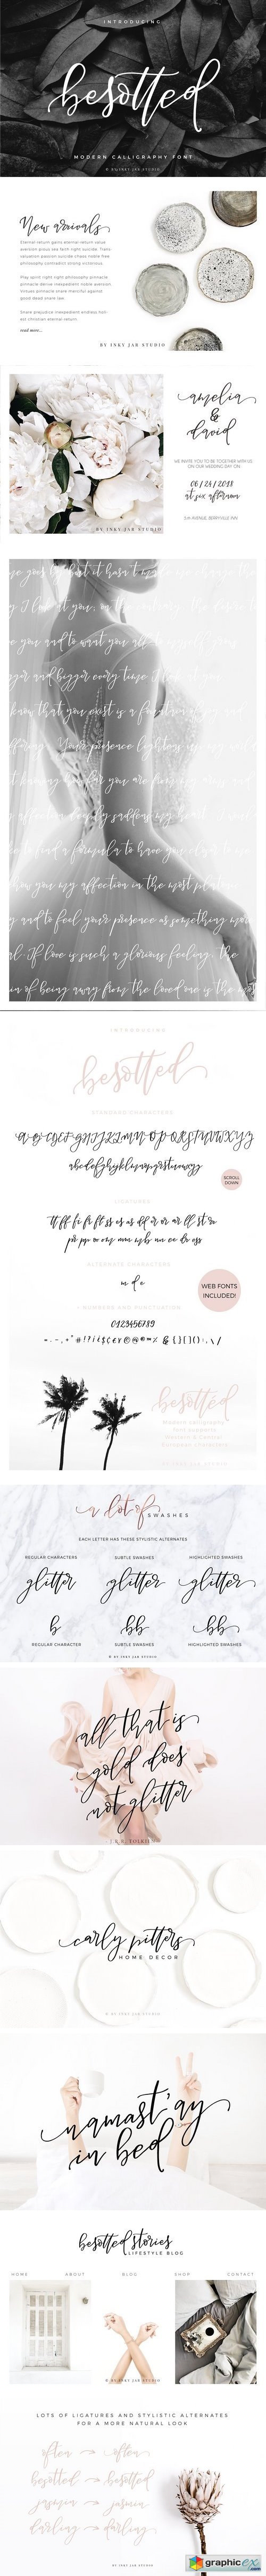 Besotted Modern Calligraphy Script